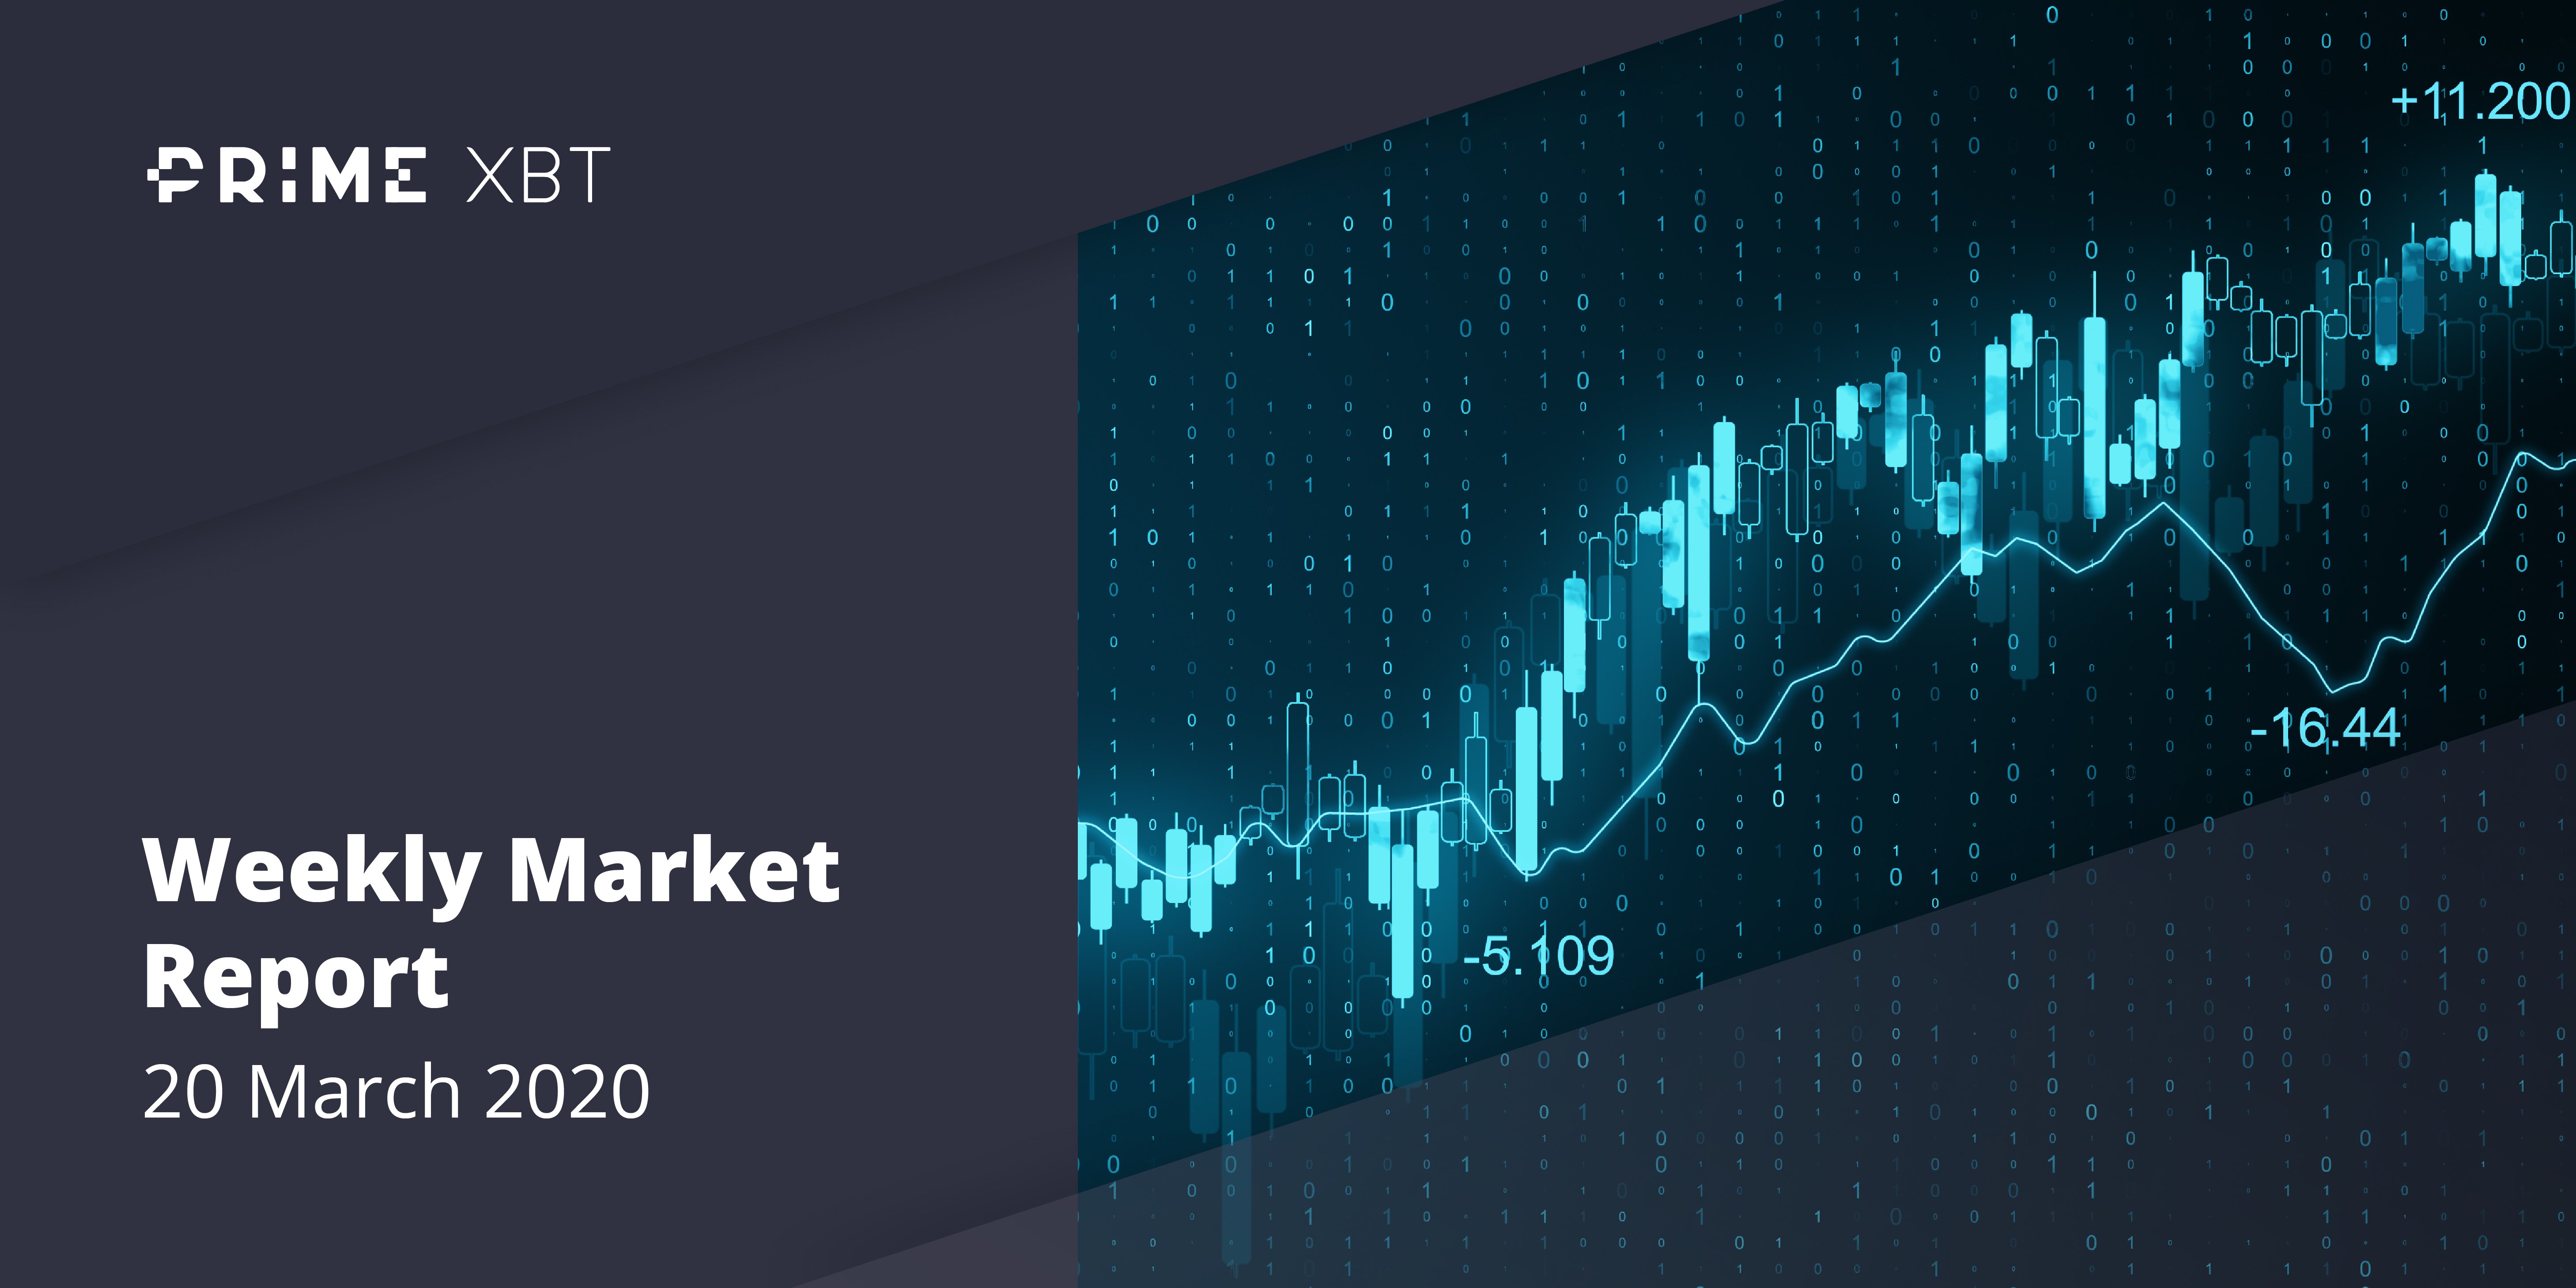 Cryptocurrency Market Report: Bitcoin Recovery Decouples from Stock Market, Takes Aim At Unseating the Dollar - 20.03.20